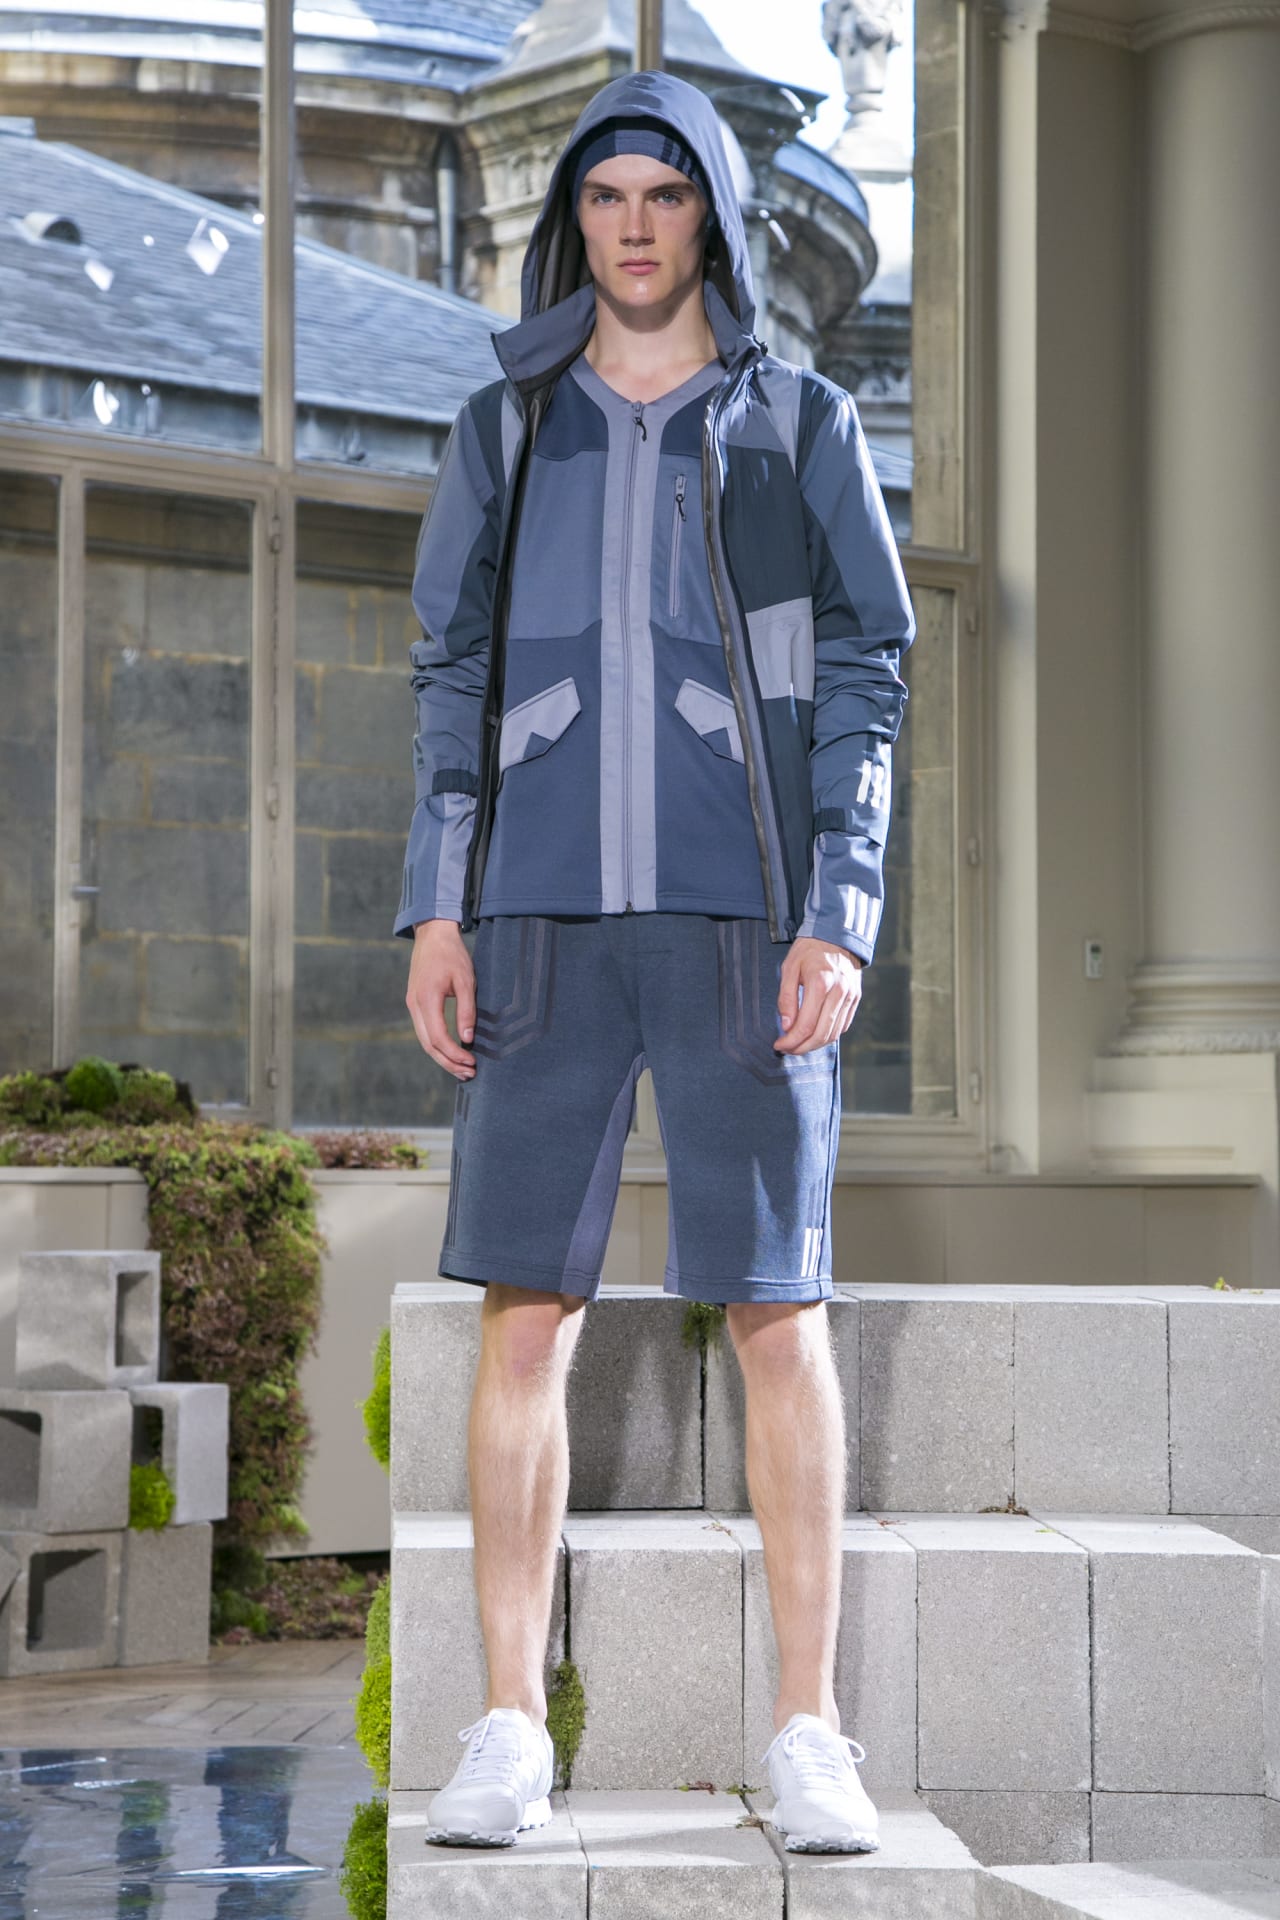 Adidas x Mountaineering Spring/Summer 2016 Is Expansive